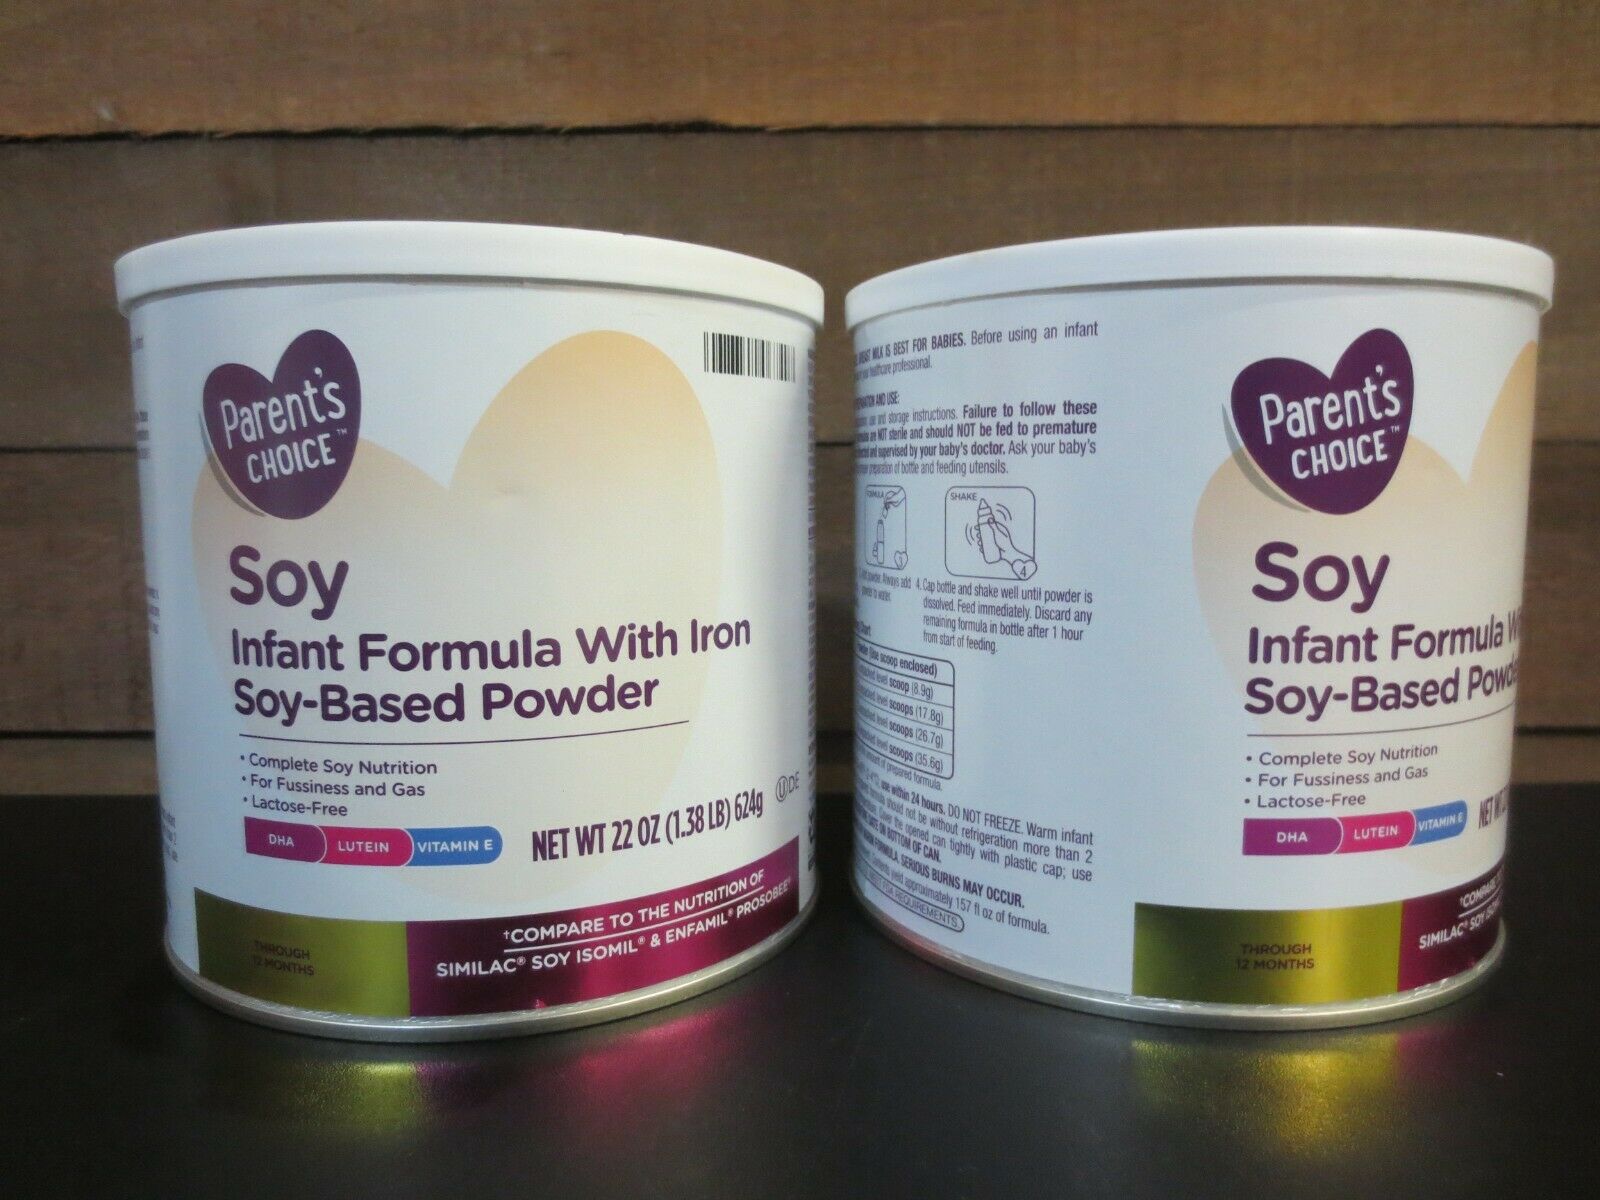 Parent's Choice Soy Baby Formula Powder with Iron, 2 cans - 22 oz each